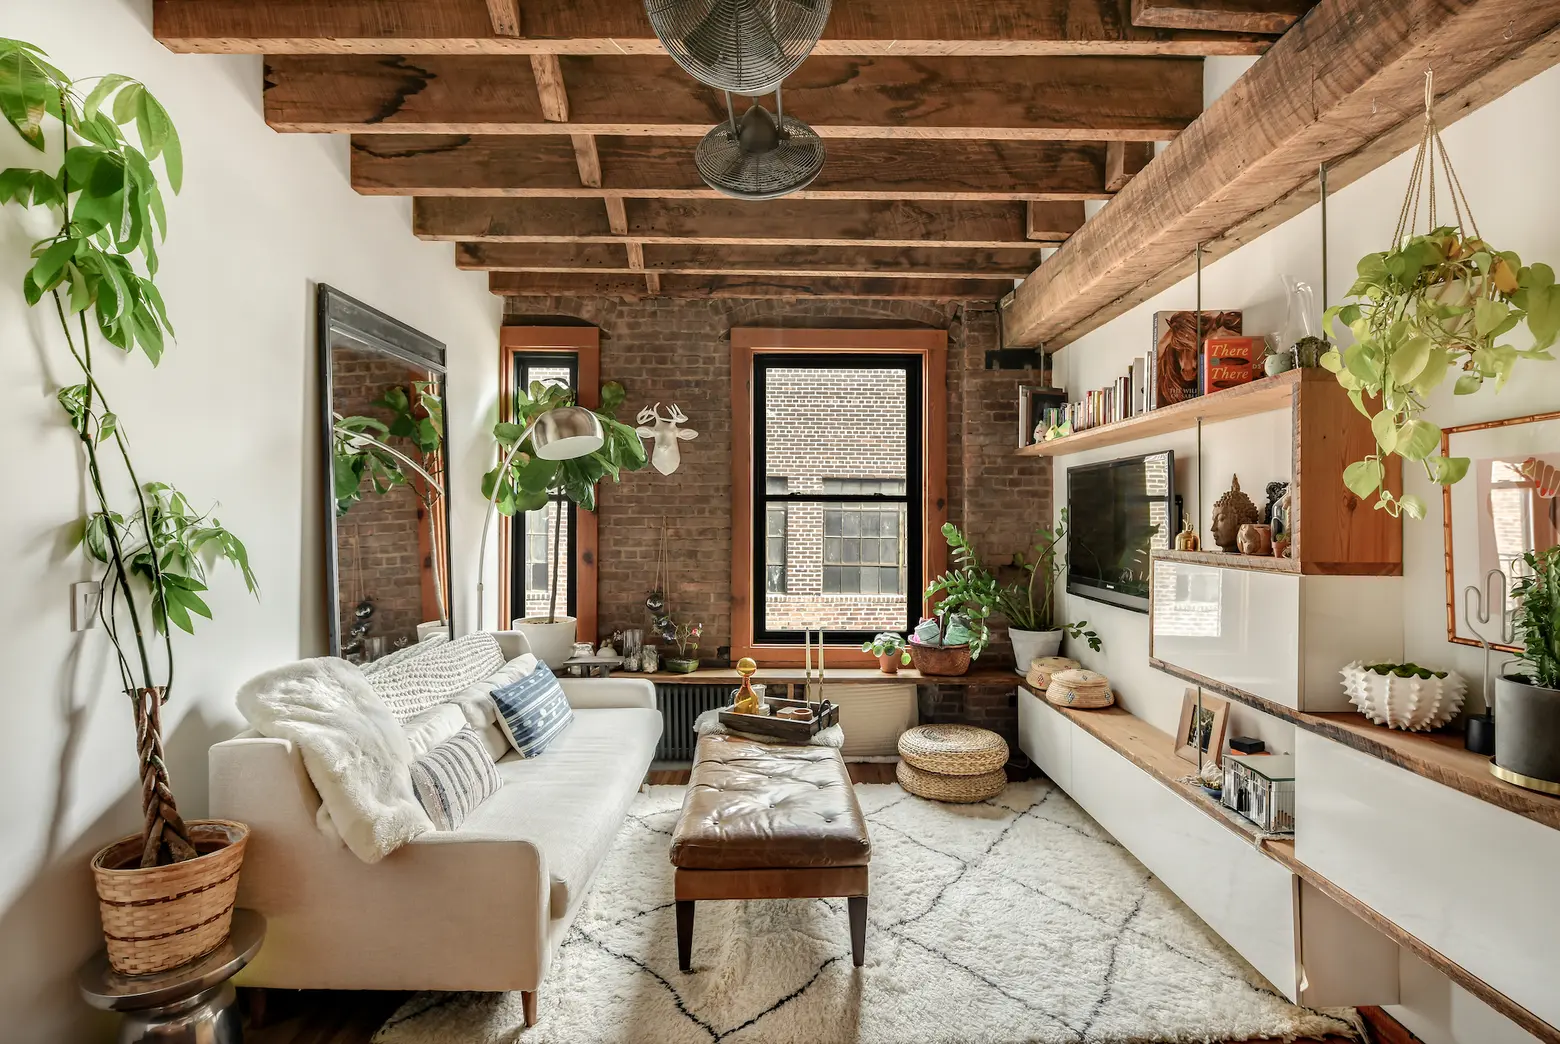 $865K Greenwich Village studio is small in size, but big in style